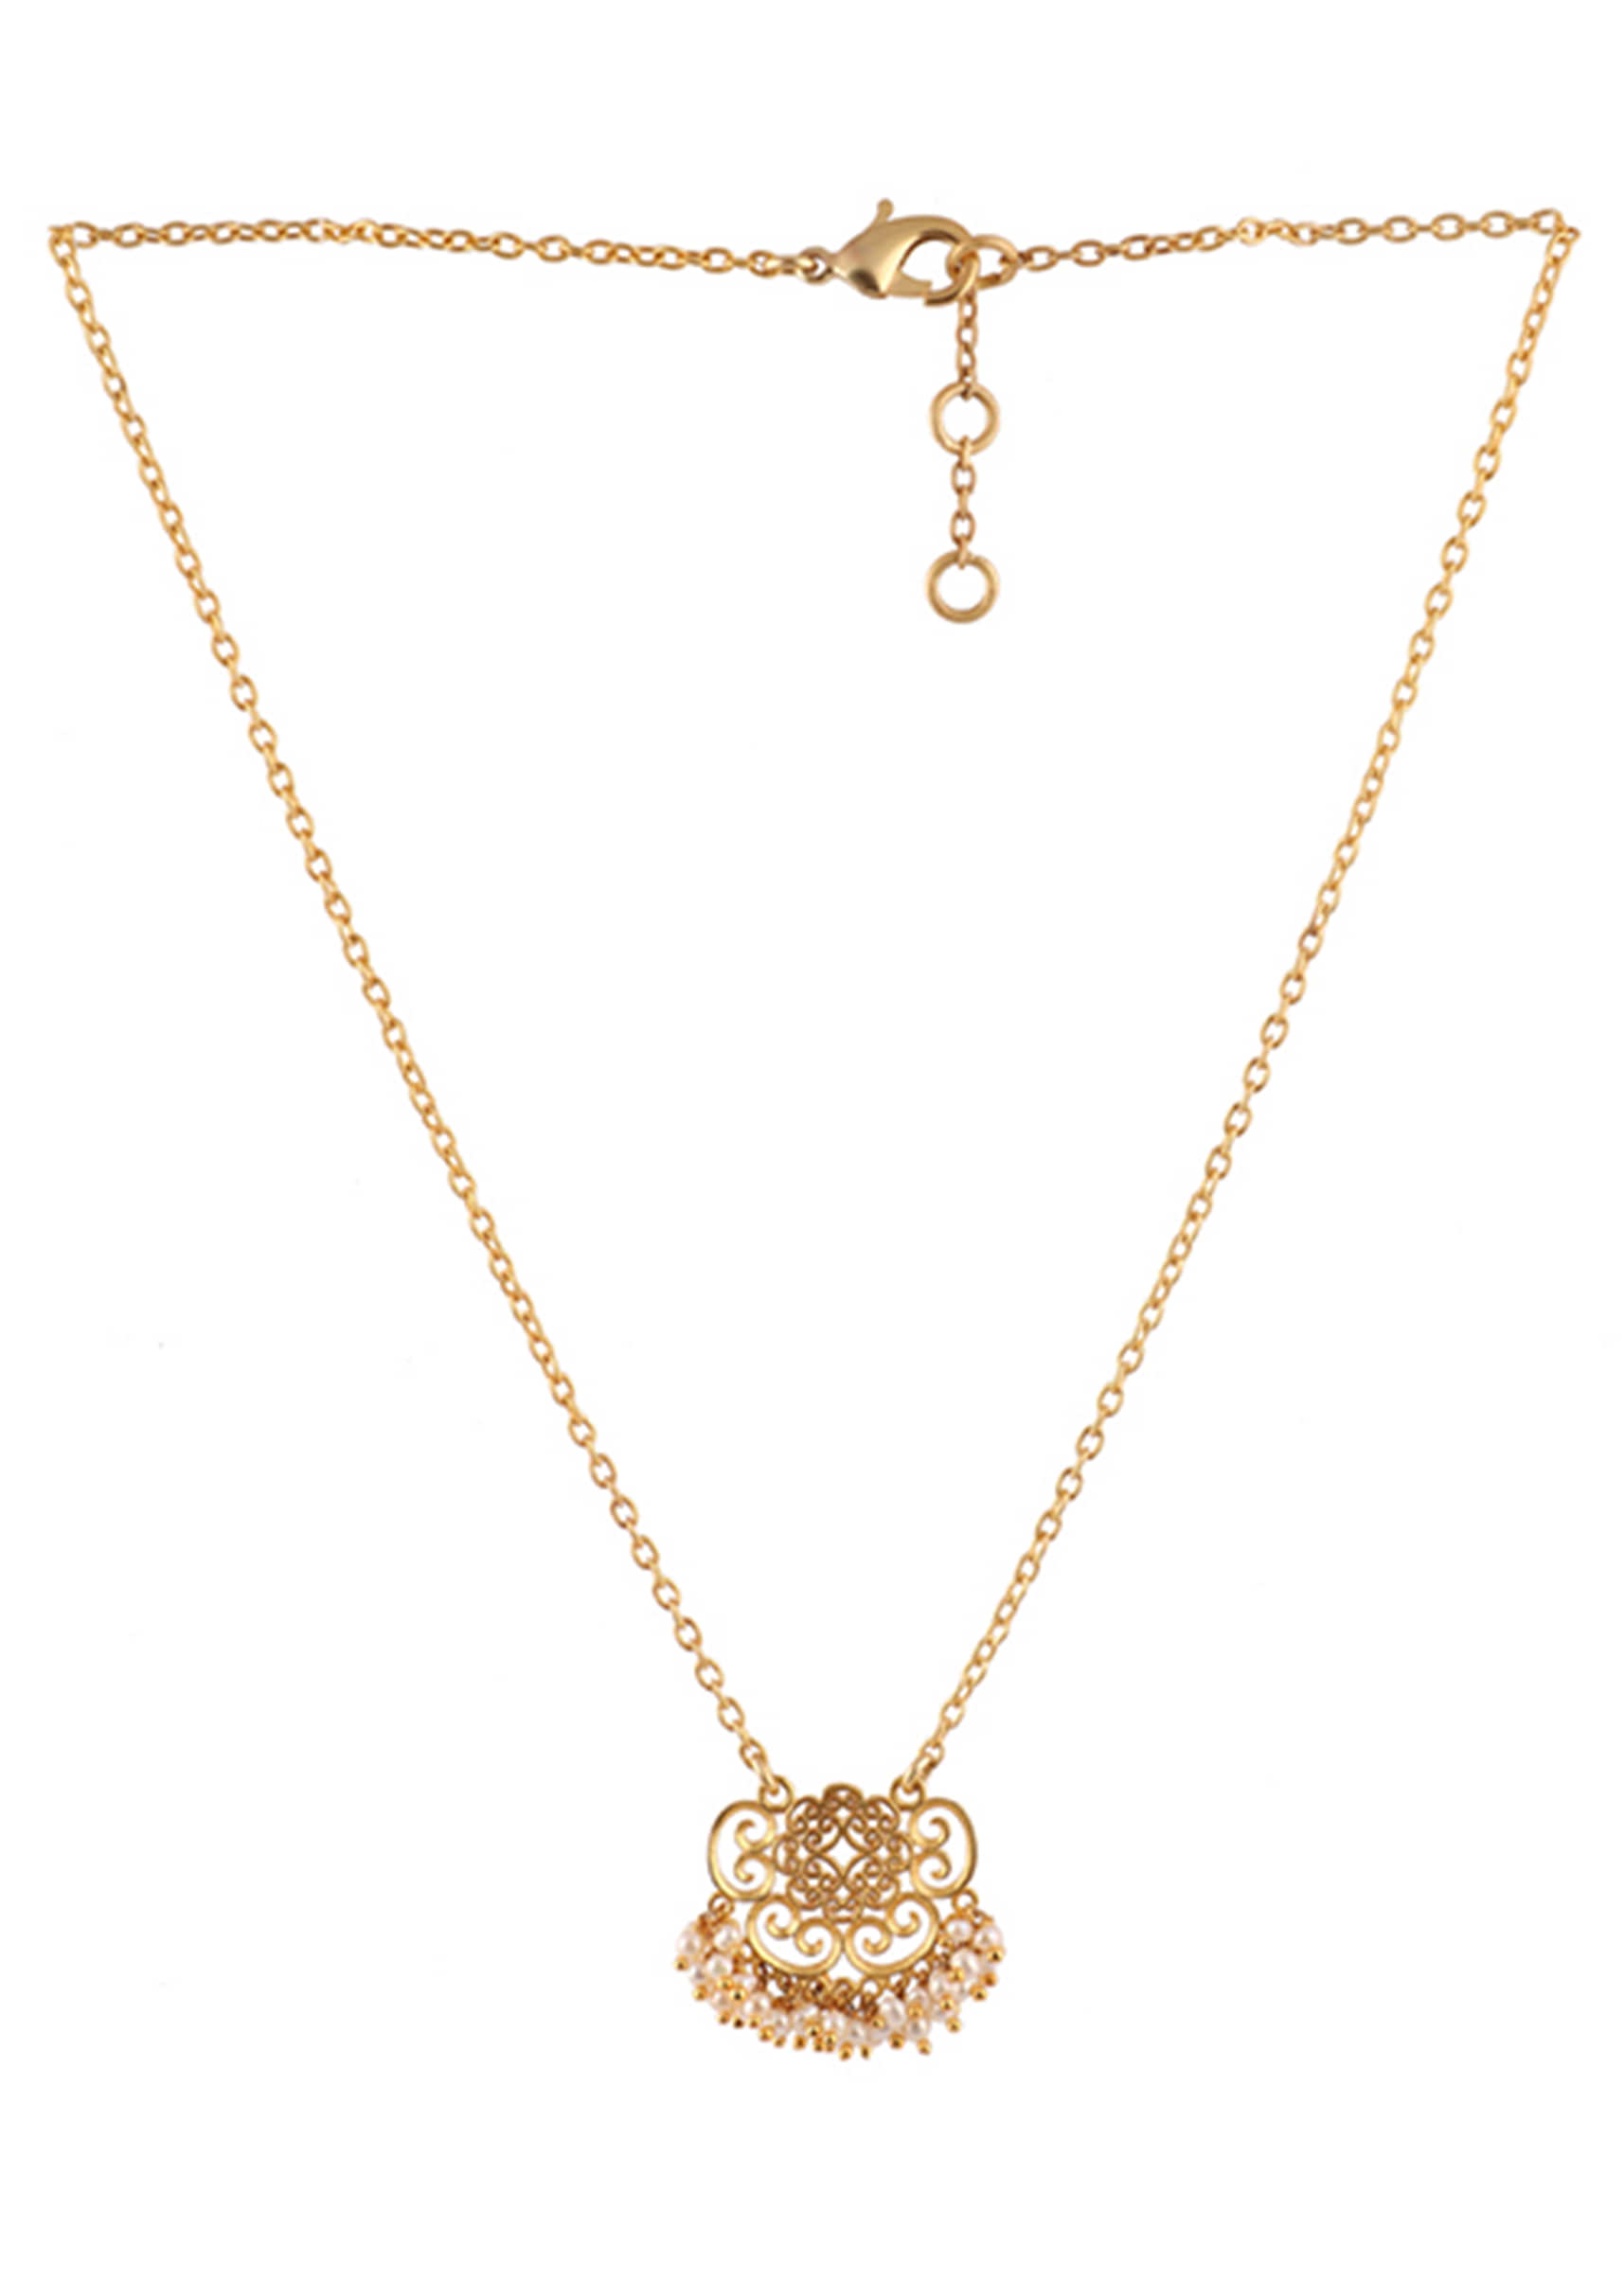 Gold Plated Necklace With Delicate Filigree Design And Pearls By Zariin